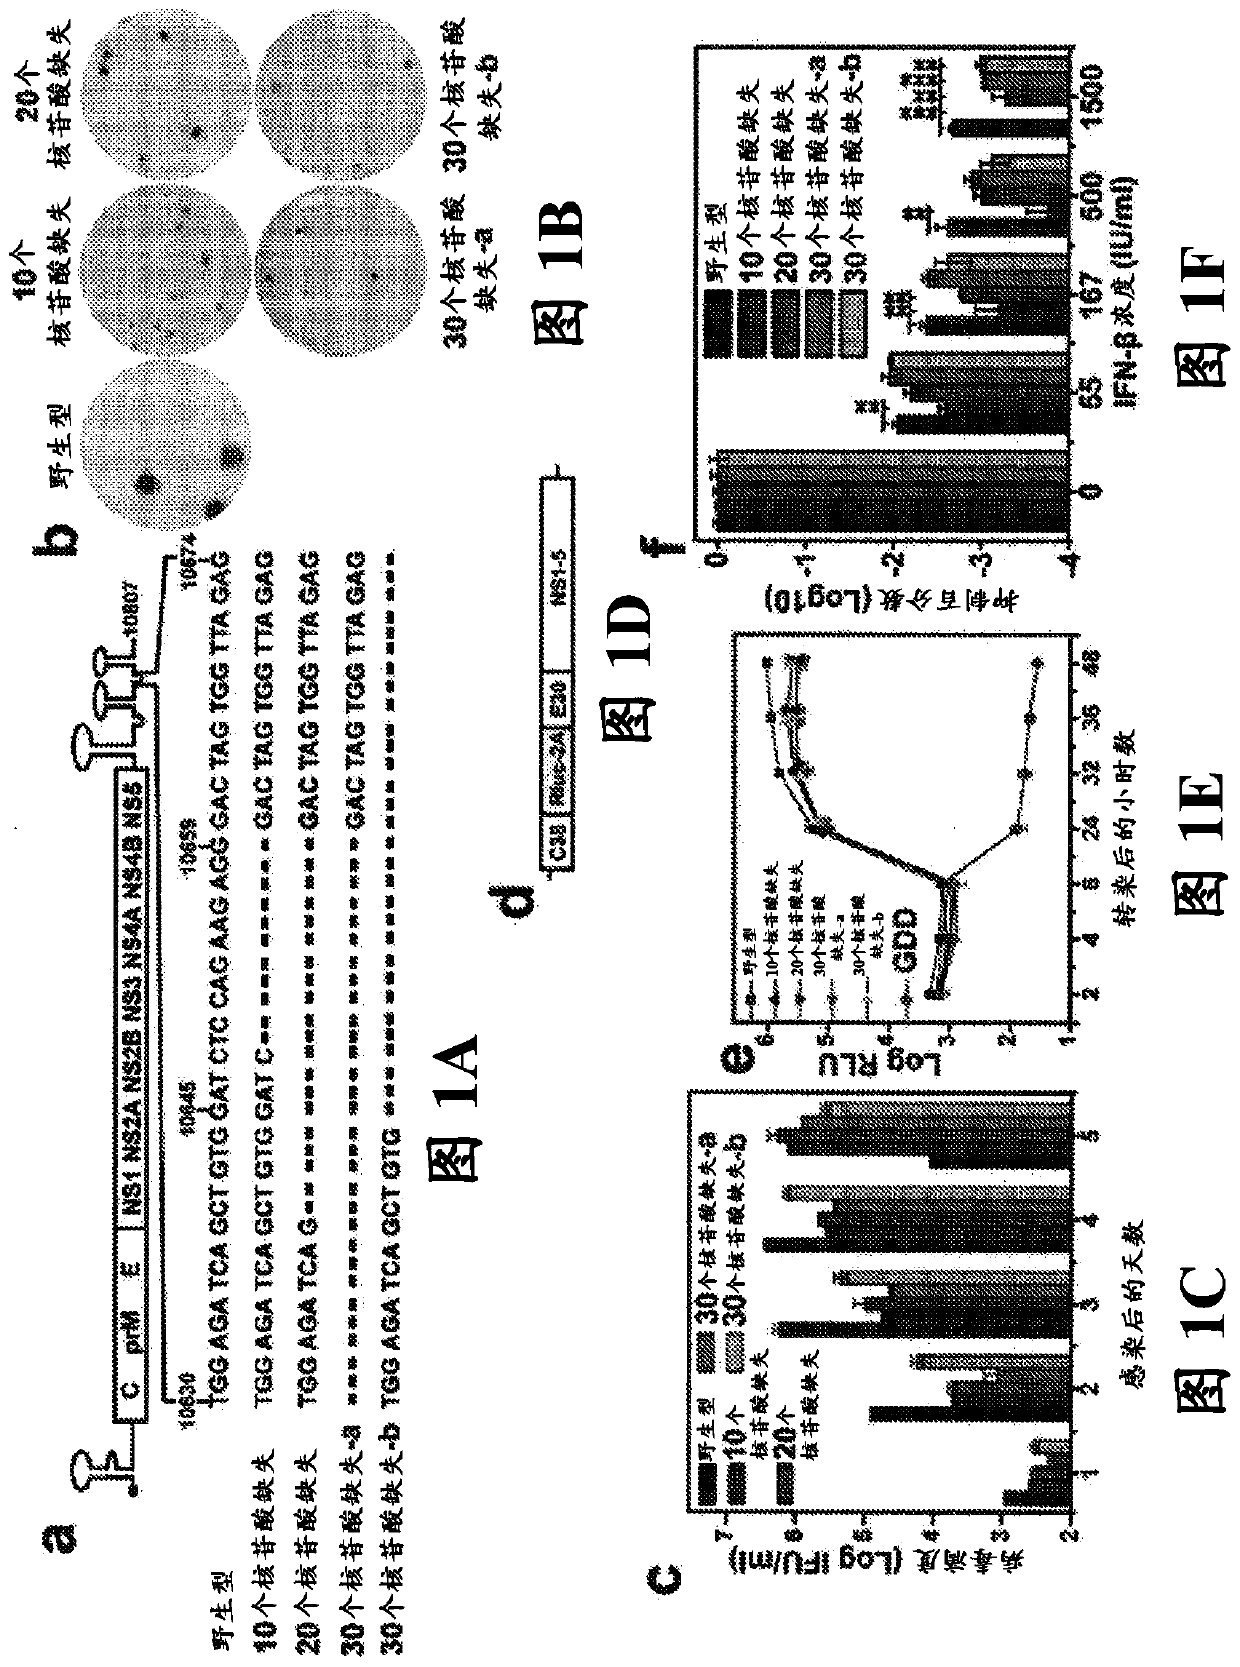 Live attenuated zika virus with 3'utr deletion, vaccine containing and use thereof